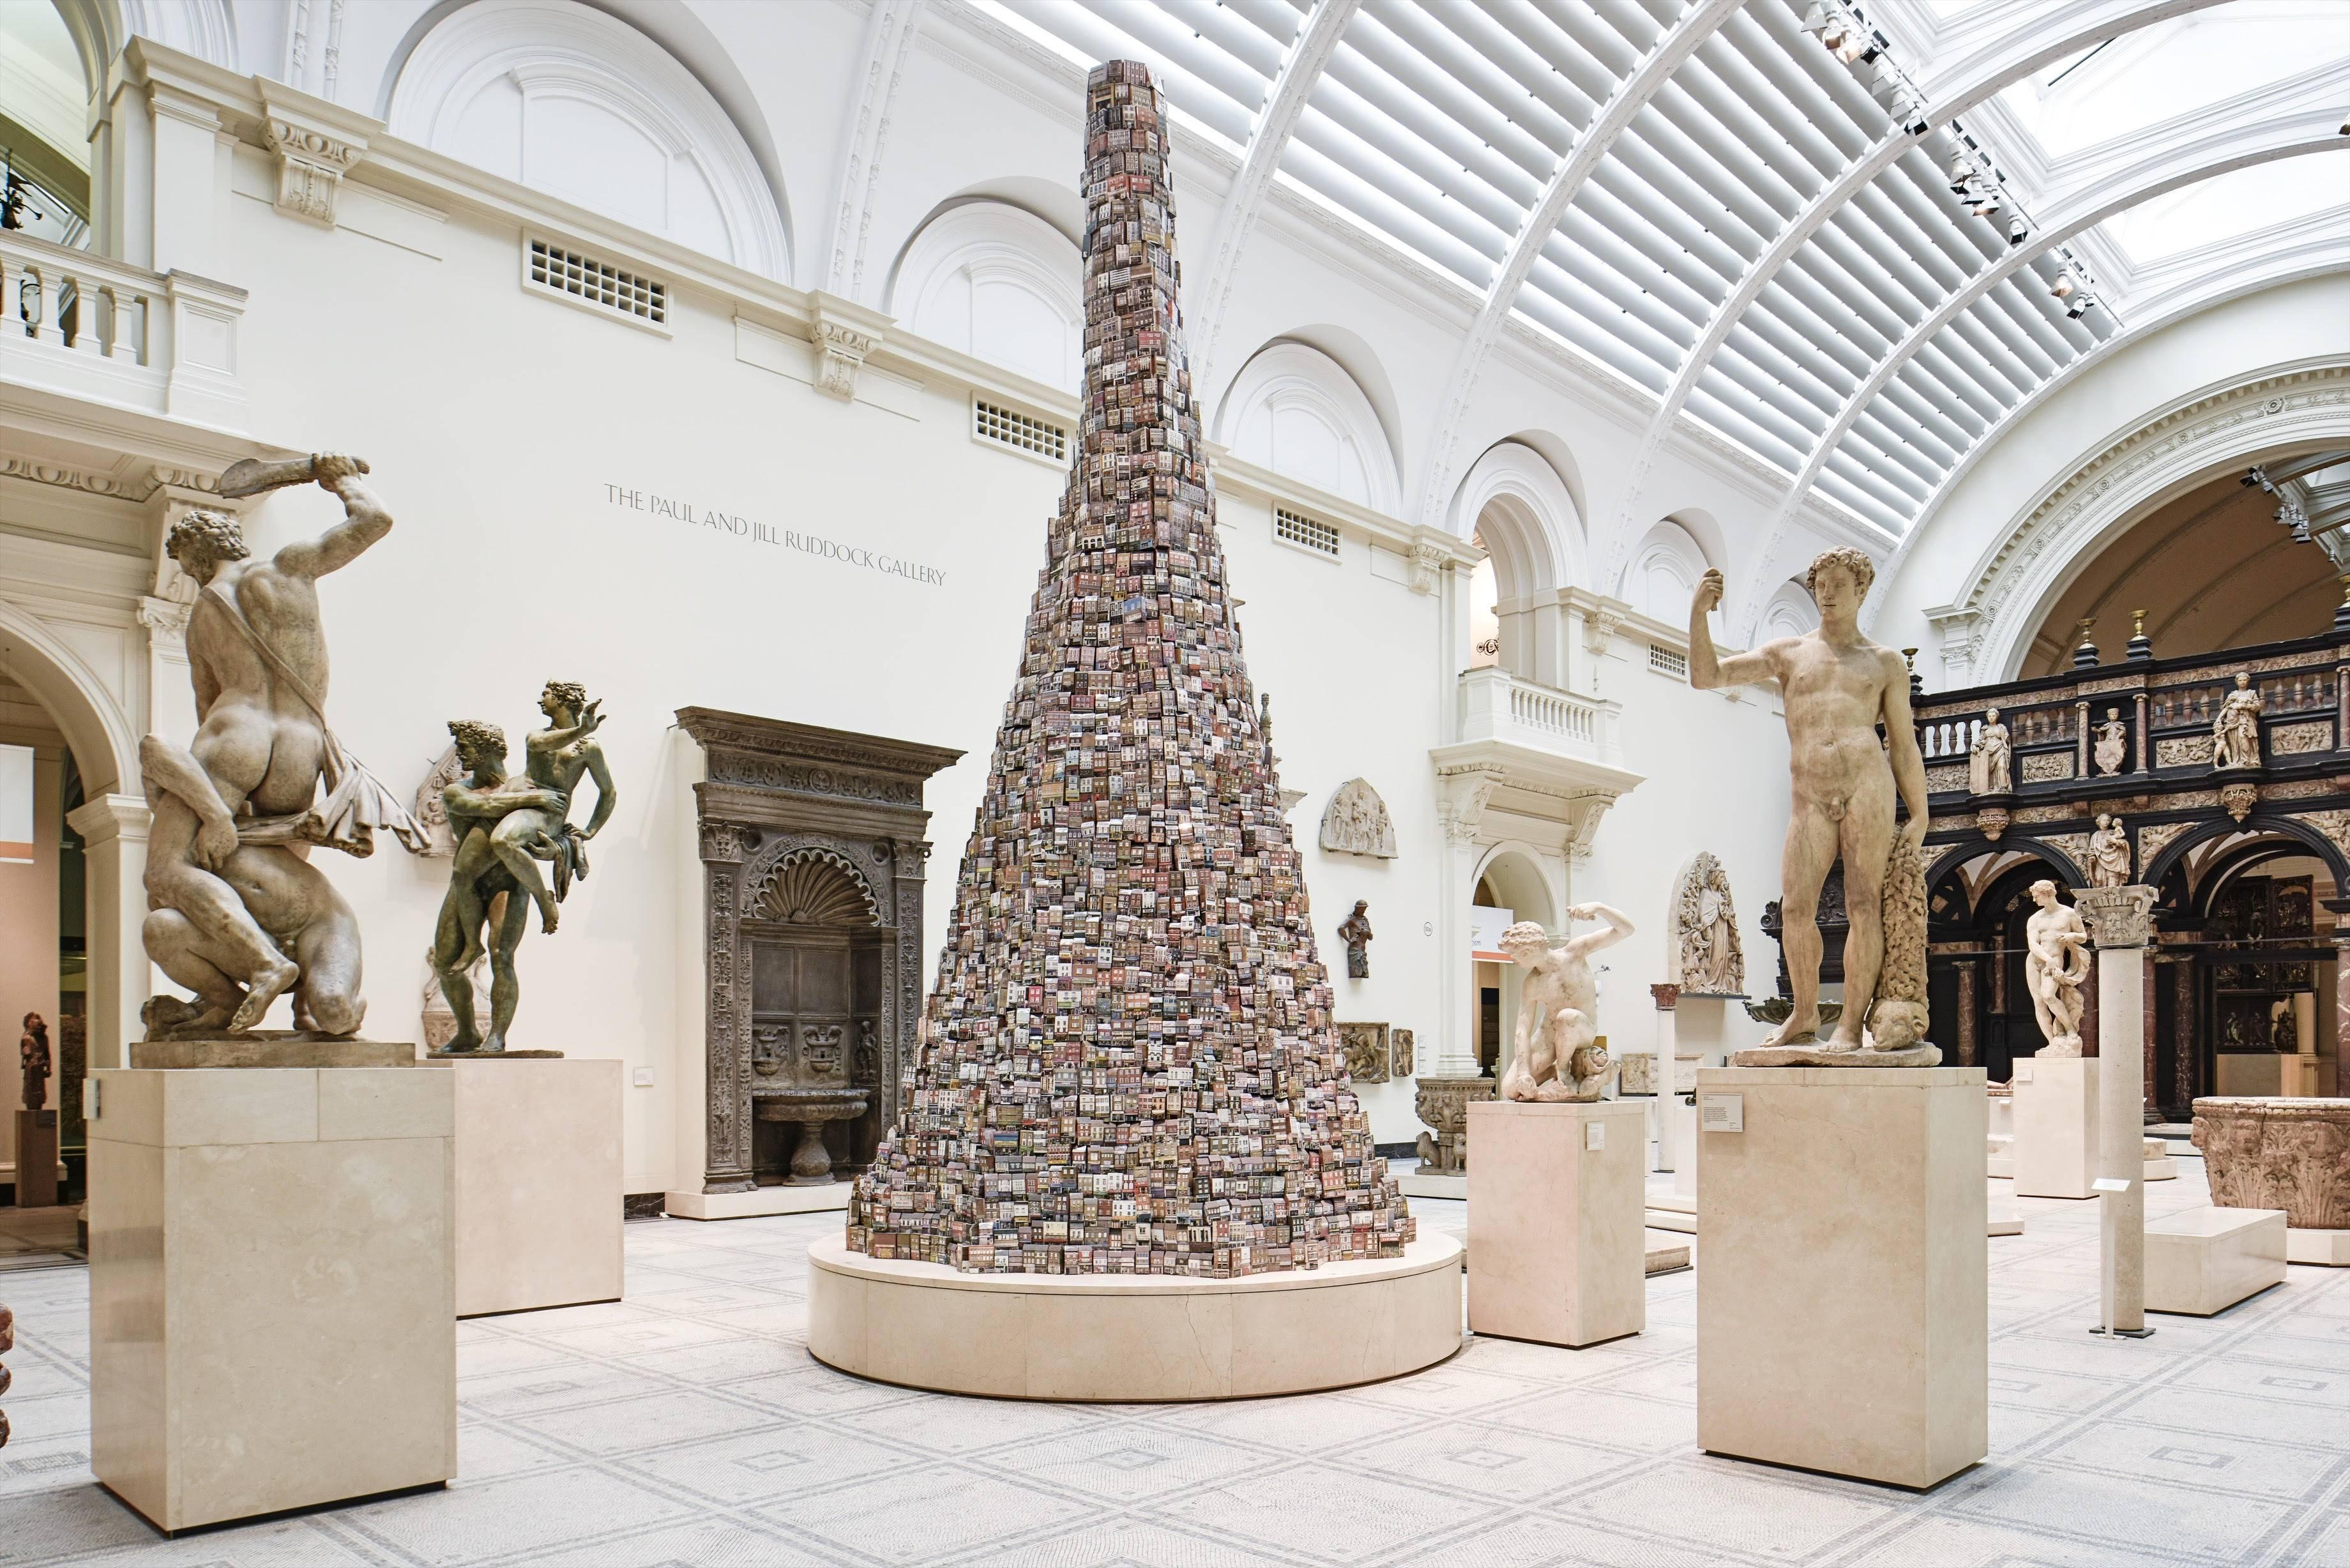 Created especially for the V&A by artist Barnaby Barford, The Tower of Babel was displayed in the V&A’s Medieval & Renaissance Galleries from 8 September to 1 November 2015.

The Tower of Babel is Barnaby Barford��’s representation of